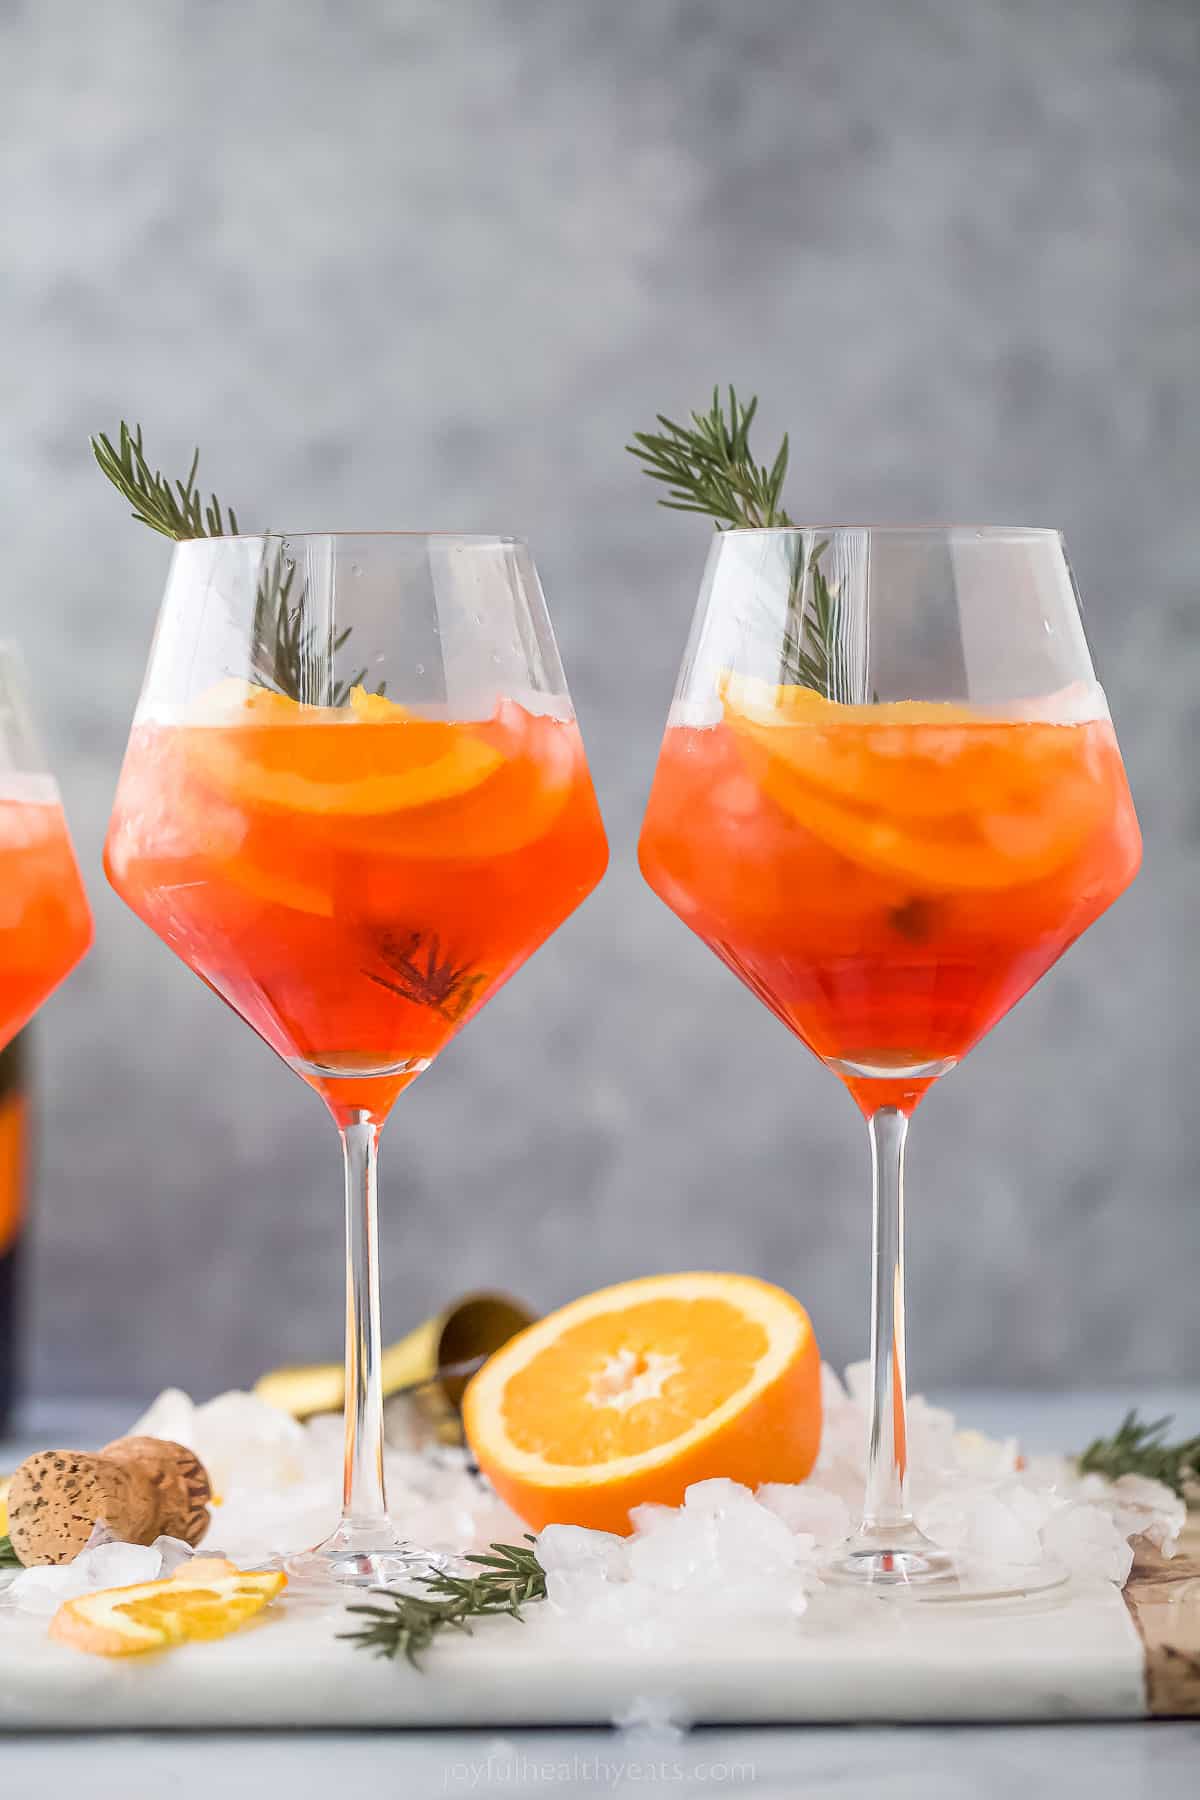 two ،liday aperol spritz ،tails - a dark orange drink with orange slices and rosemary garnish